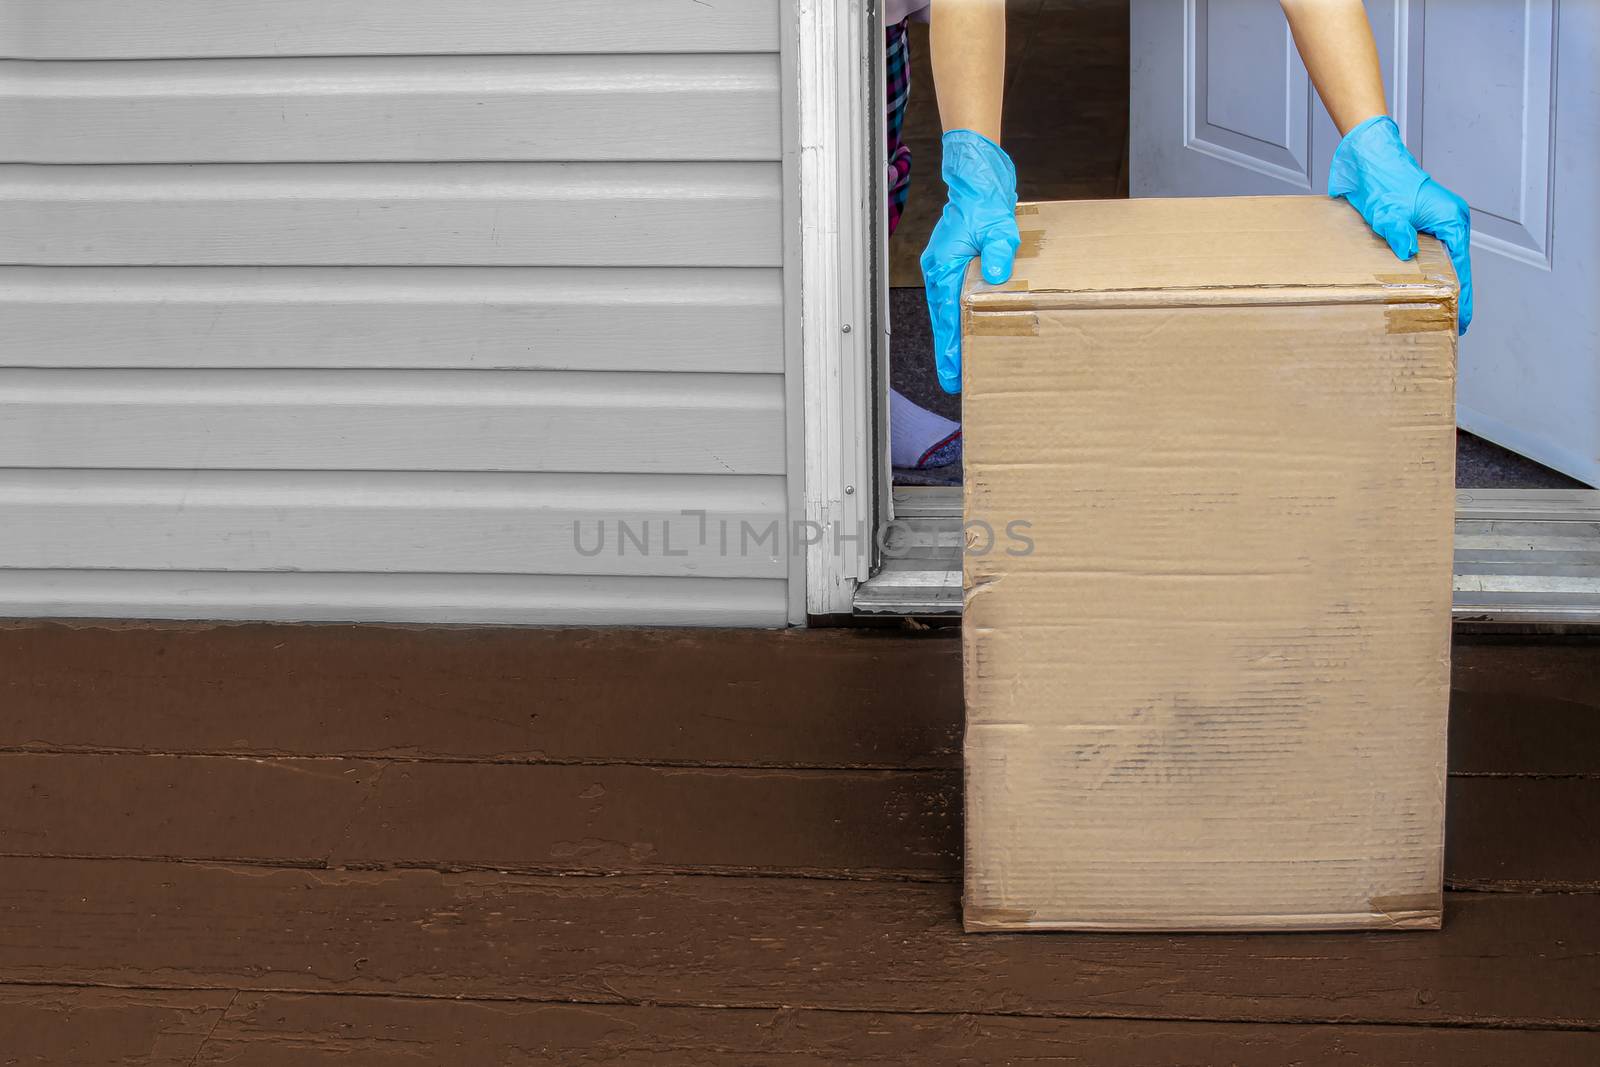 A person wearing gloves, picking up a deliver box from a home entrance